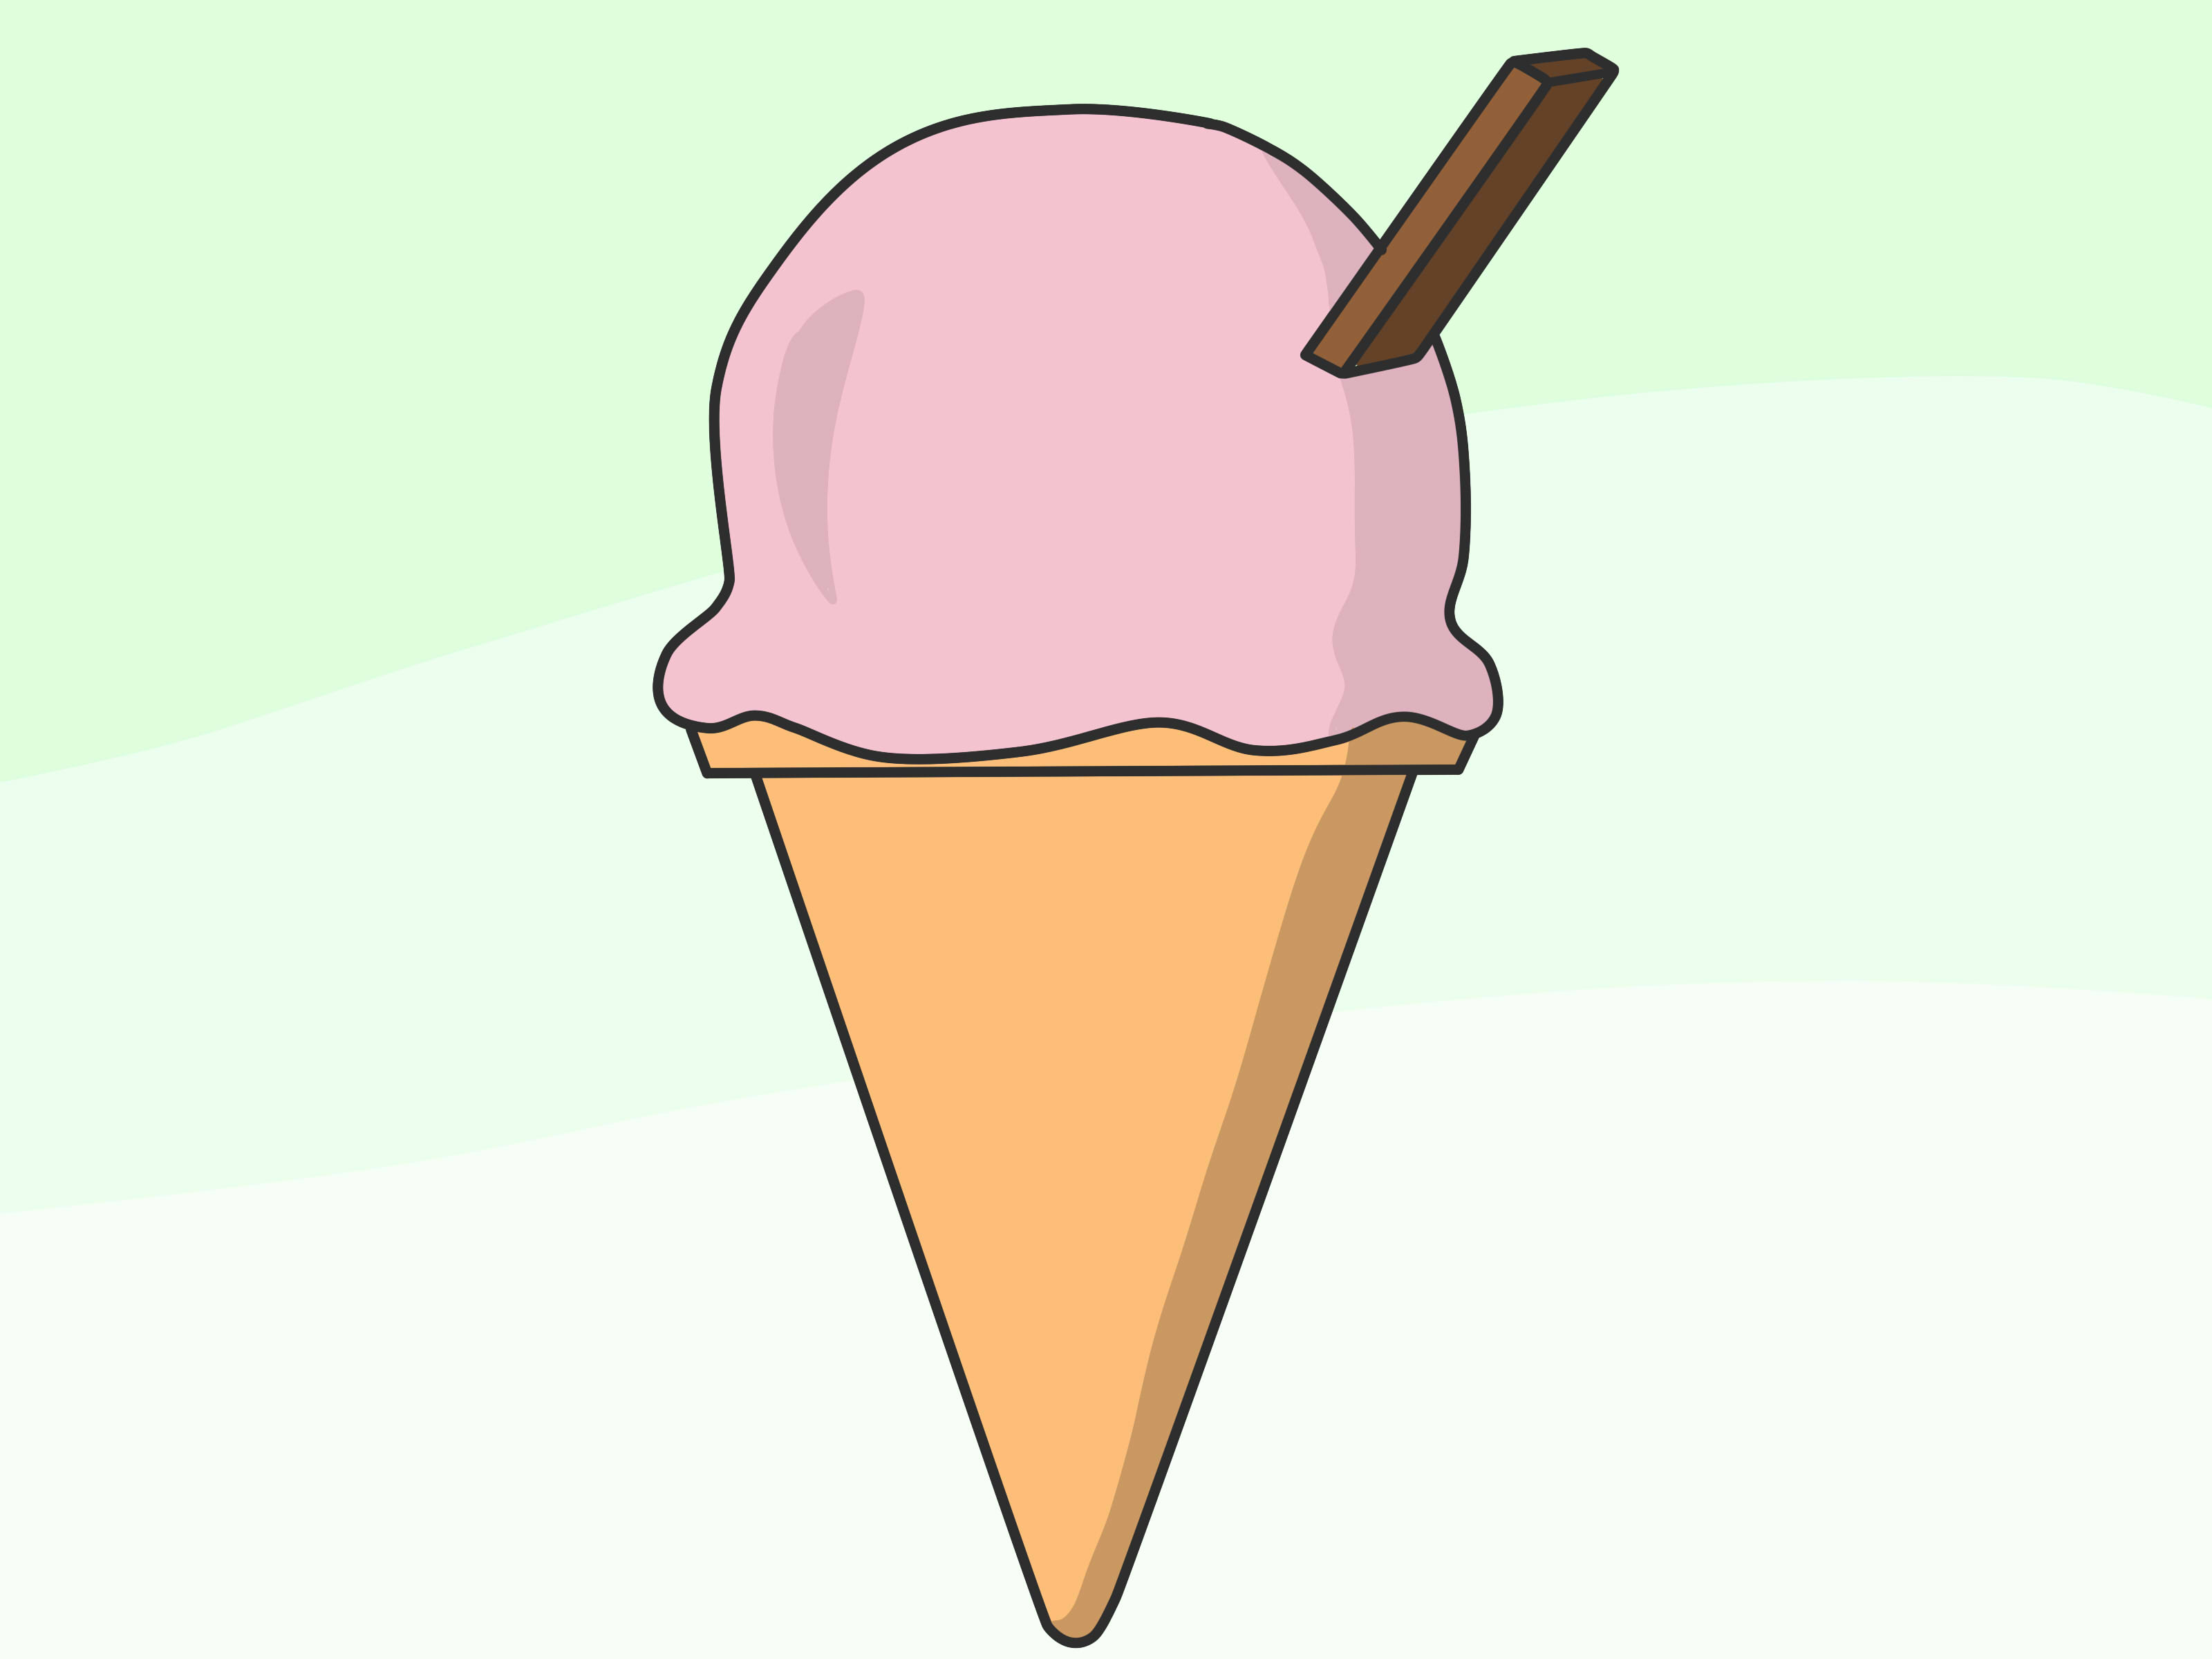 Great How To Draw Ice Cream In A Cone in the world Learn more here 